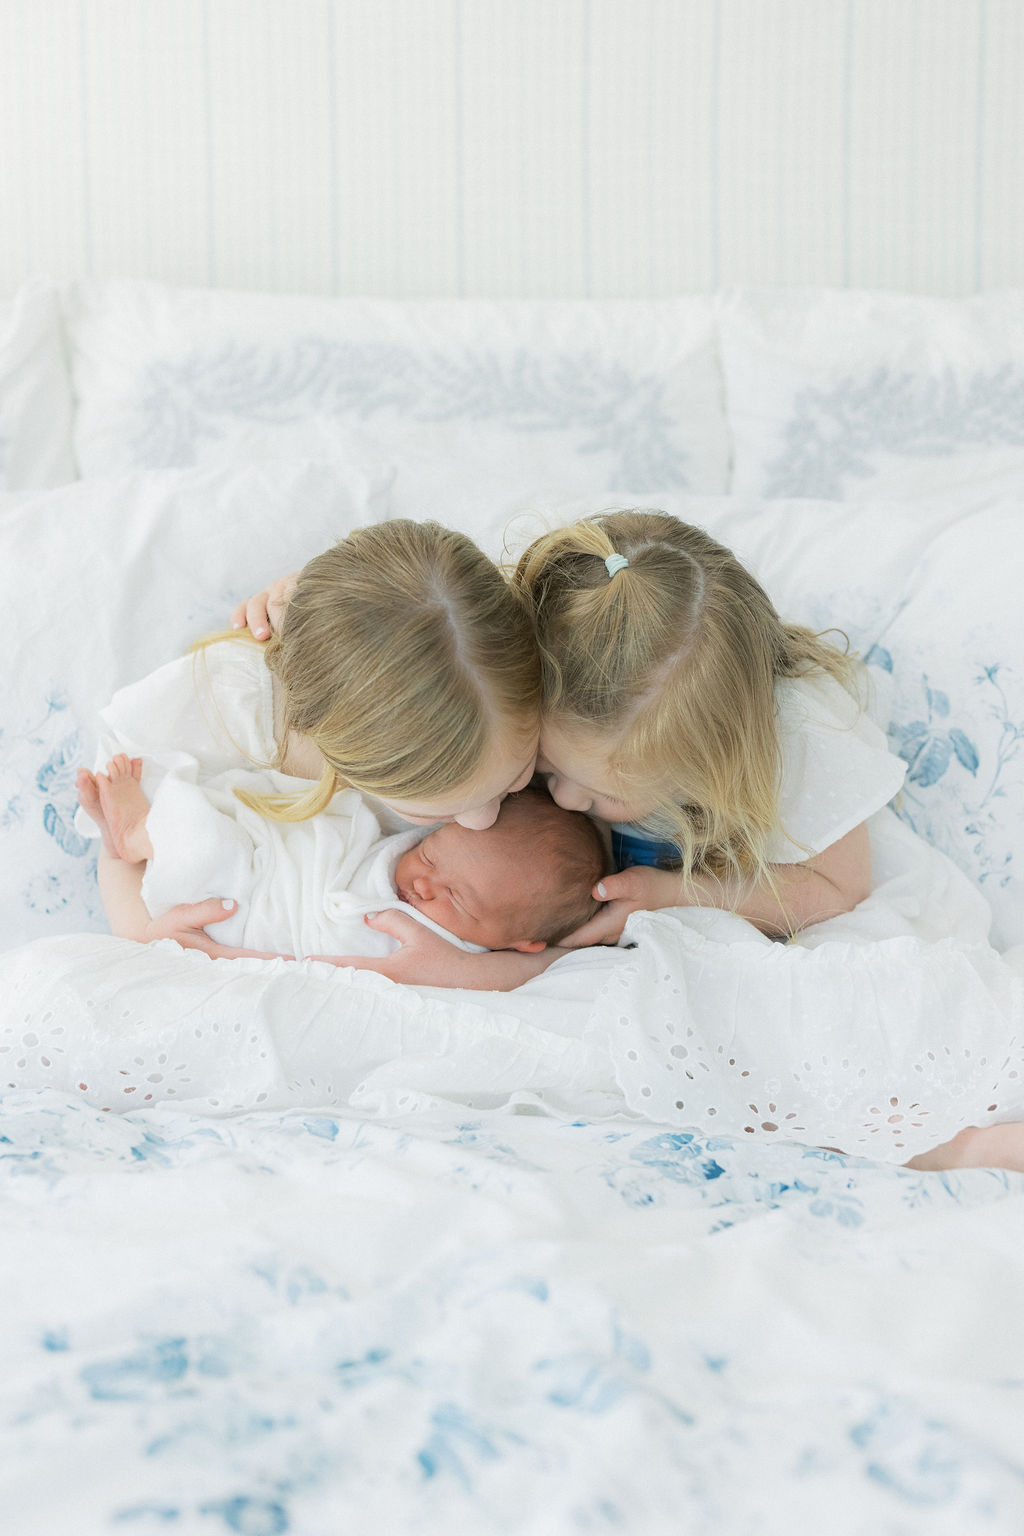 Two young girls sit on a bed in white dresses kissing the head of their newborn baby sister